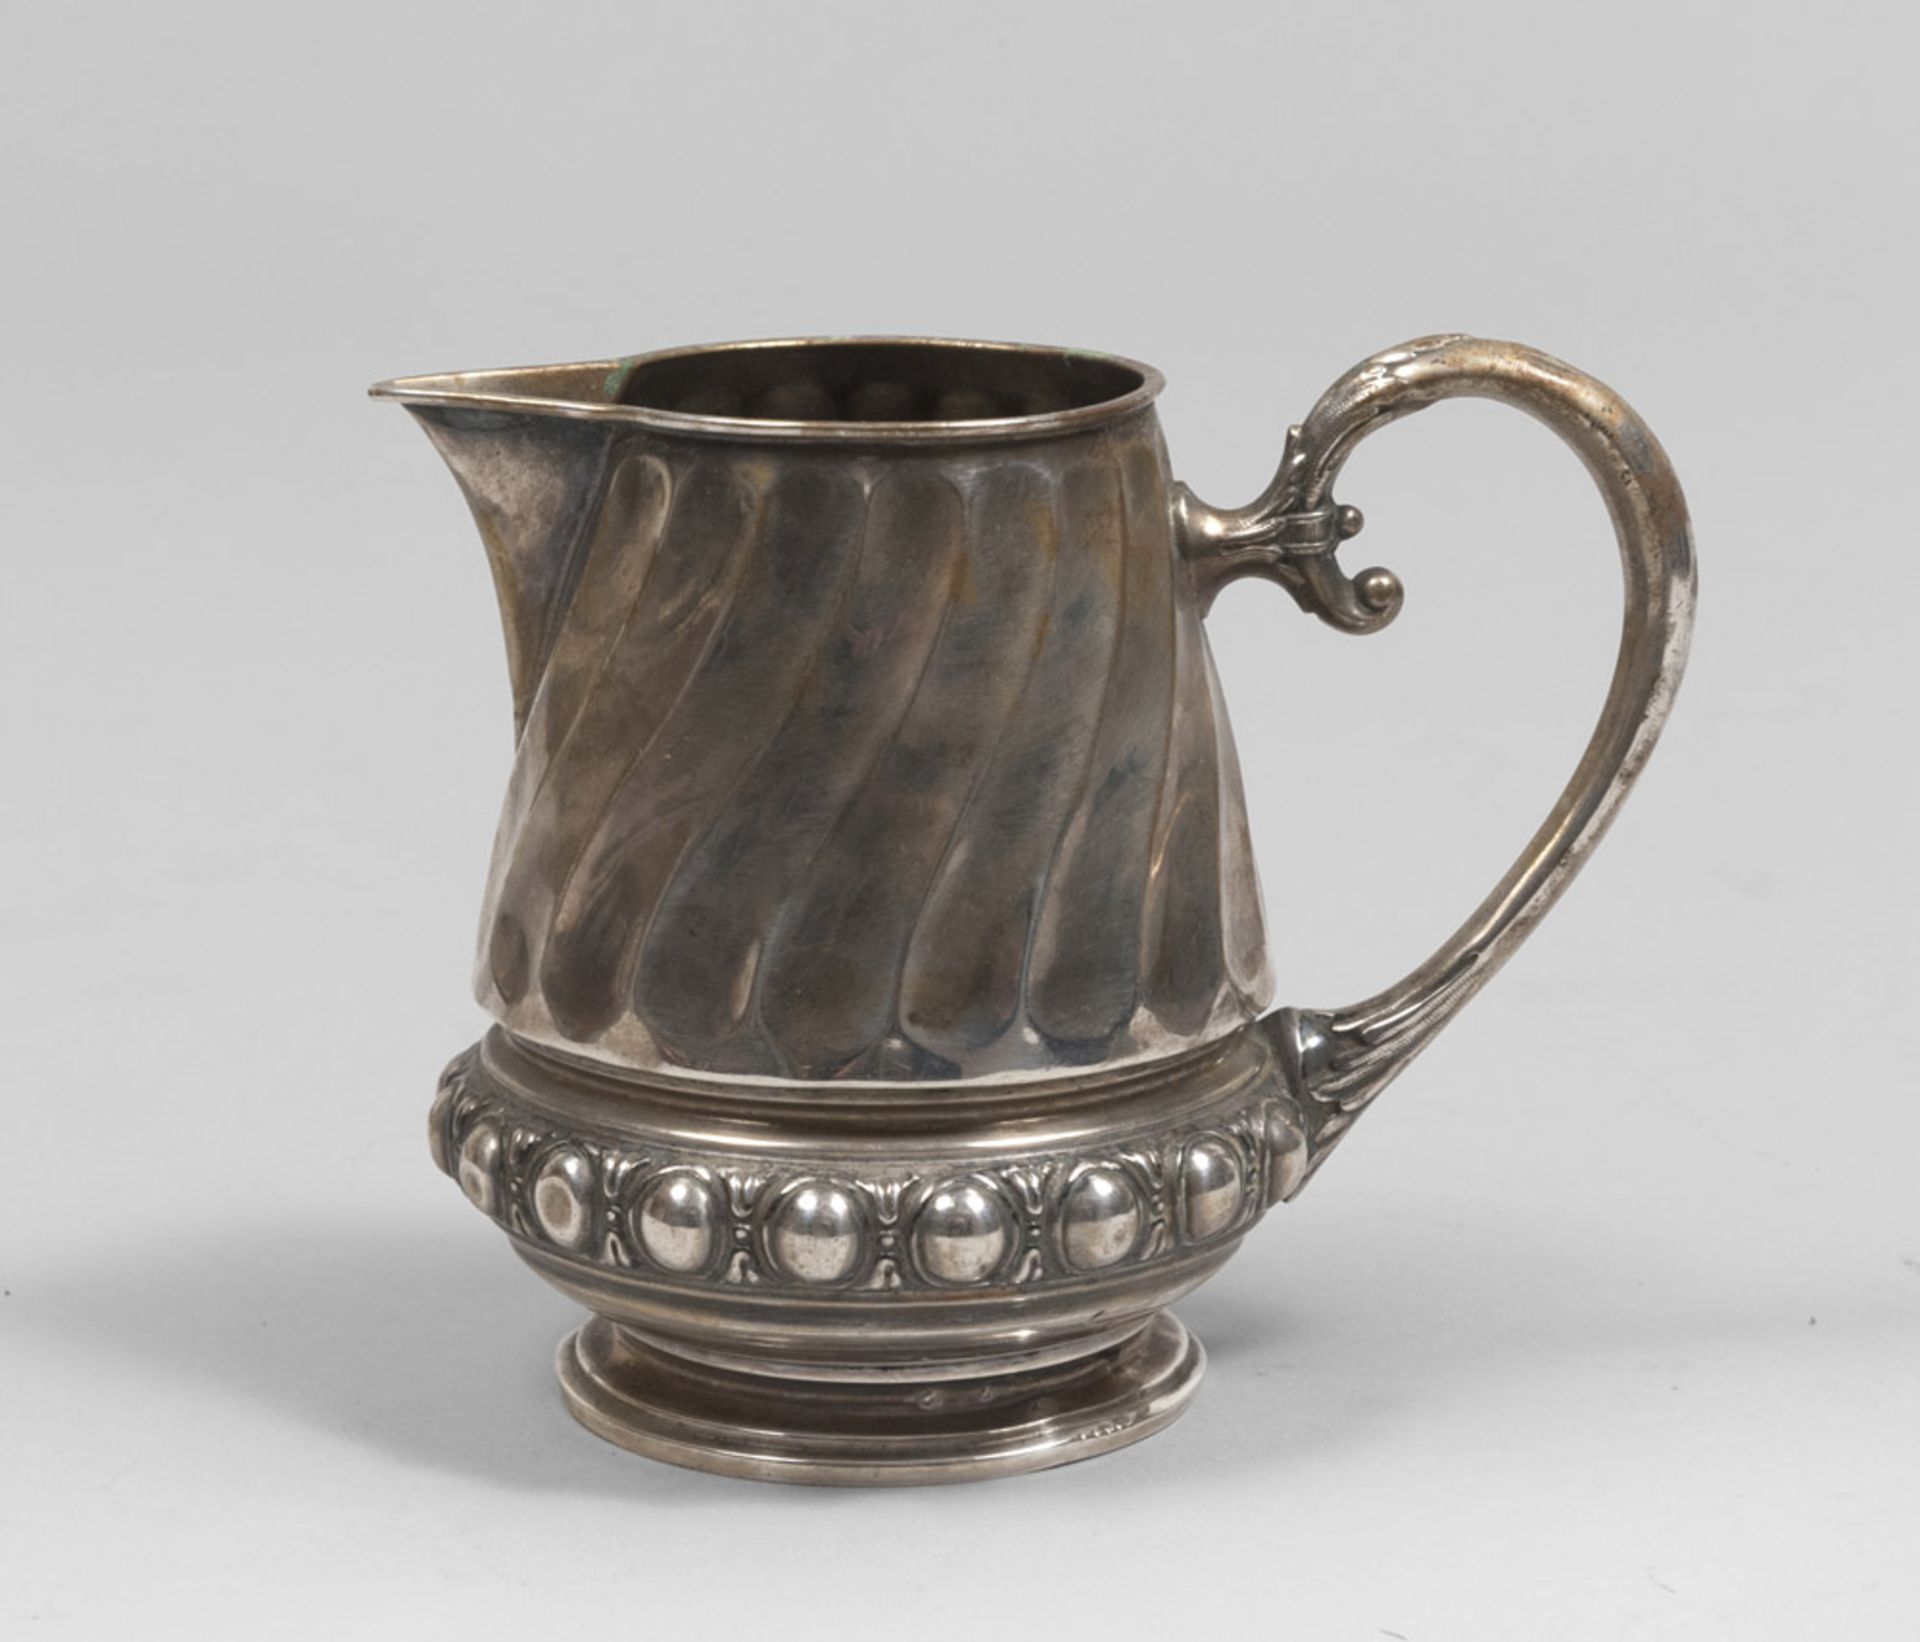 Silver milkpot, Punch Germany late 19th century. Title 800/1000. Measures cm. 12 x 10 x 14, weight